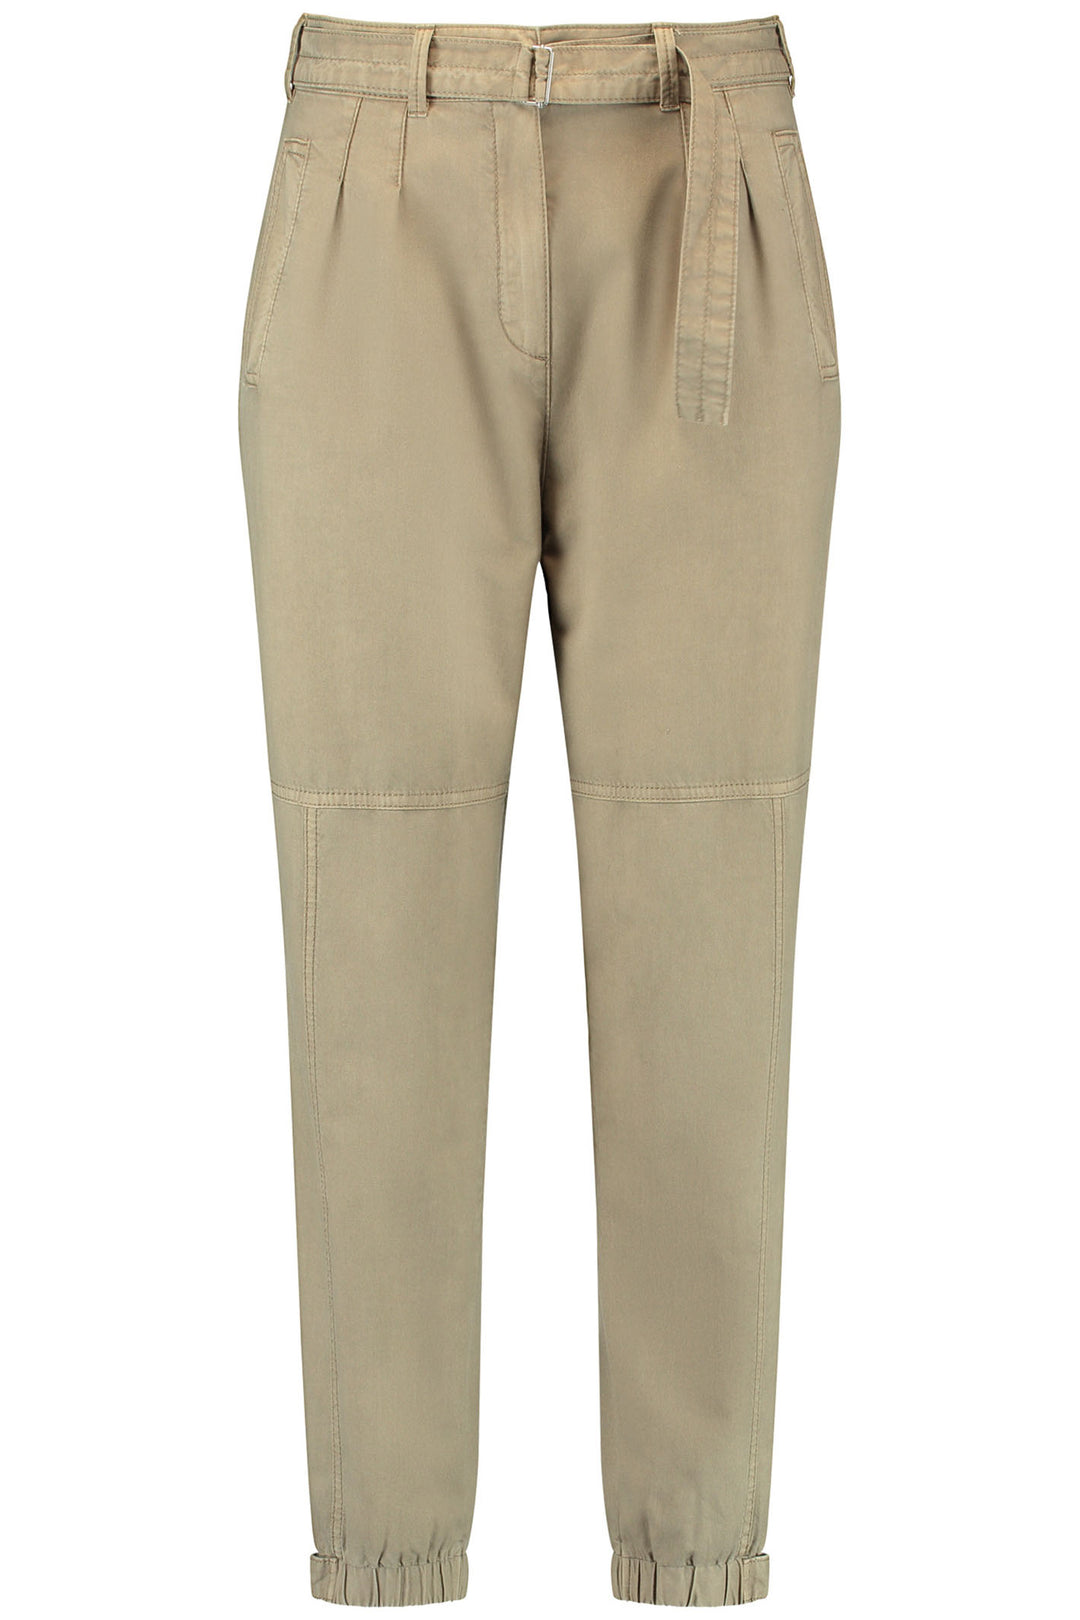 Gerry Weber 222129 Dune Sand Chino Trousers - Experience Boutique